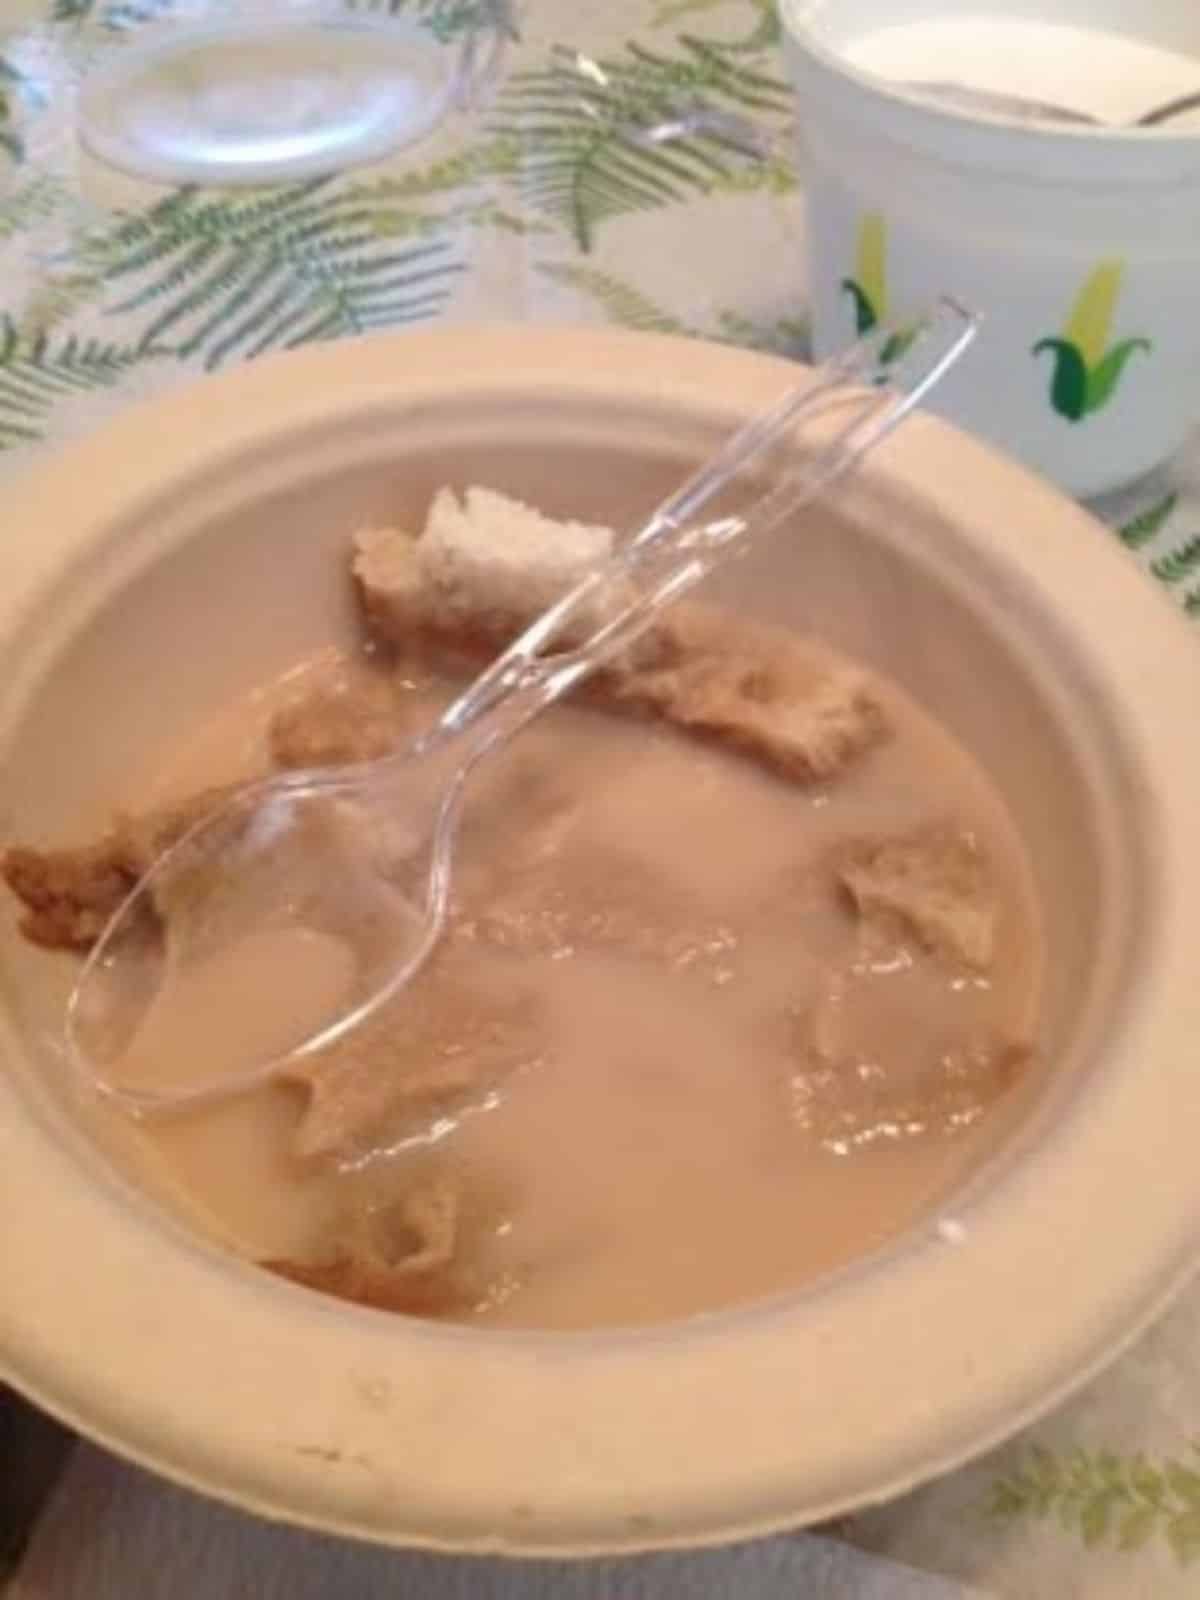 Delicious coffee soup in a gray bowl with a plastic spoon.